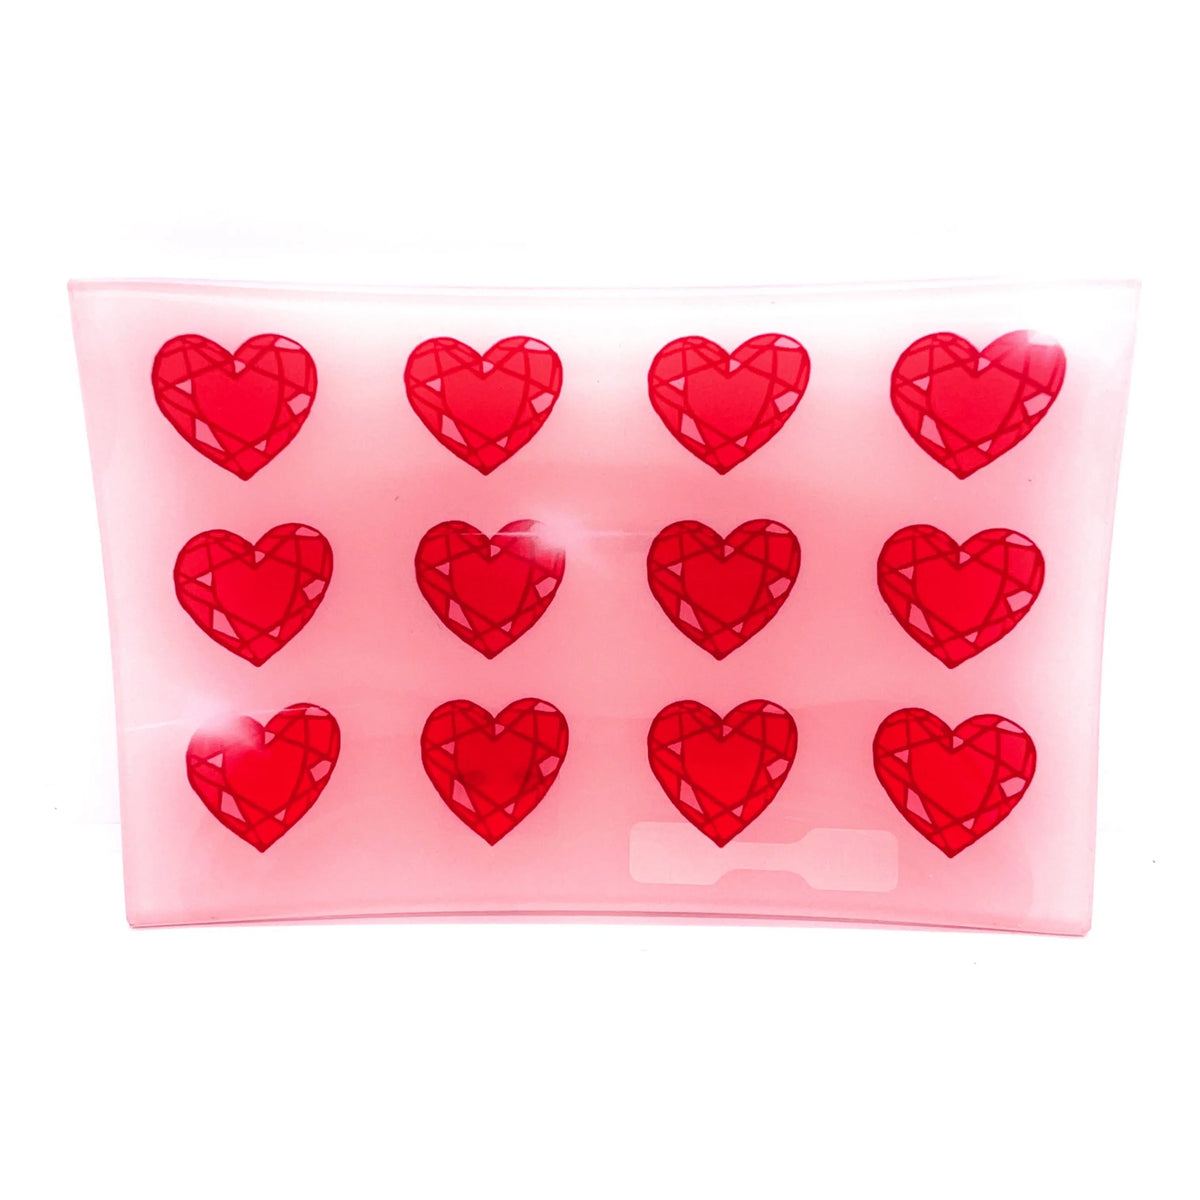 The red heart dish is full of love. It also holds your special treasures.  This glass handmade jewelry tray is great alone or paired with your favorite jewels.  Made by Lisa Bayer and size 5x7.  100% glass